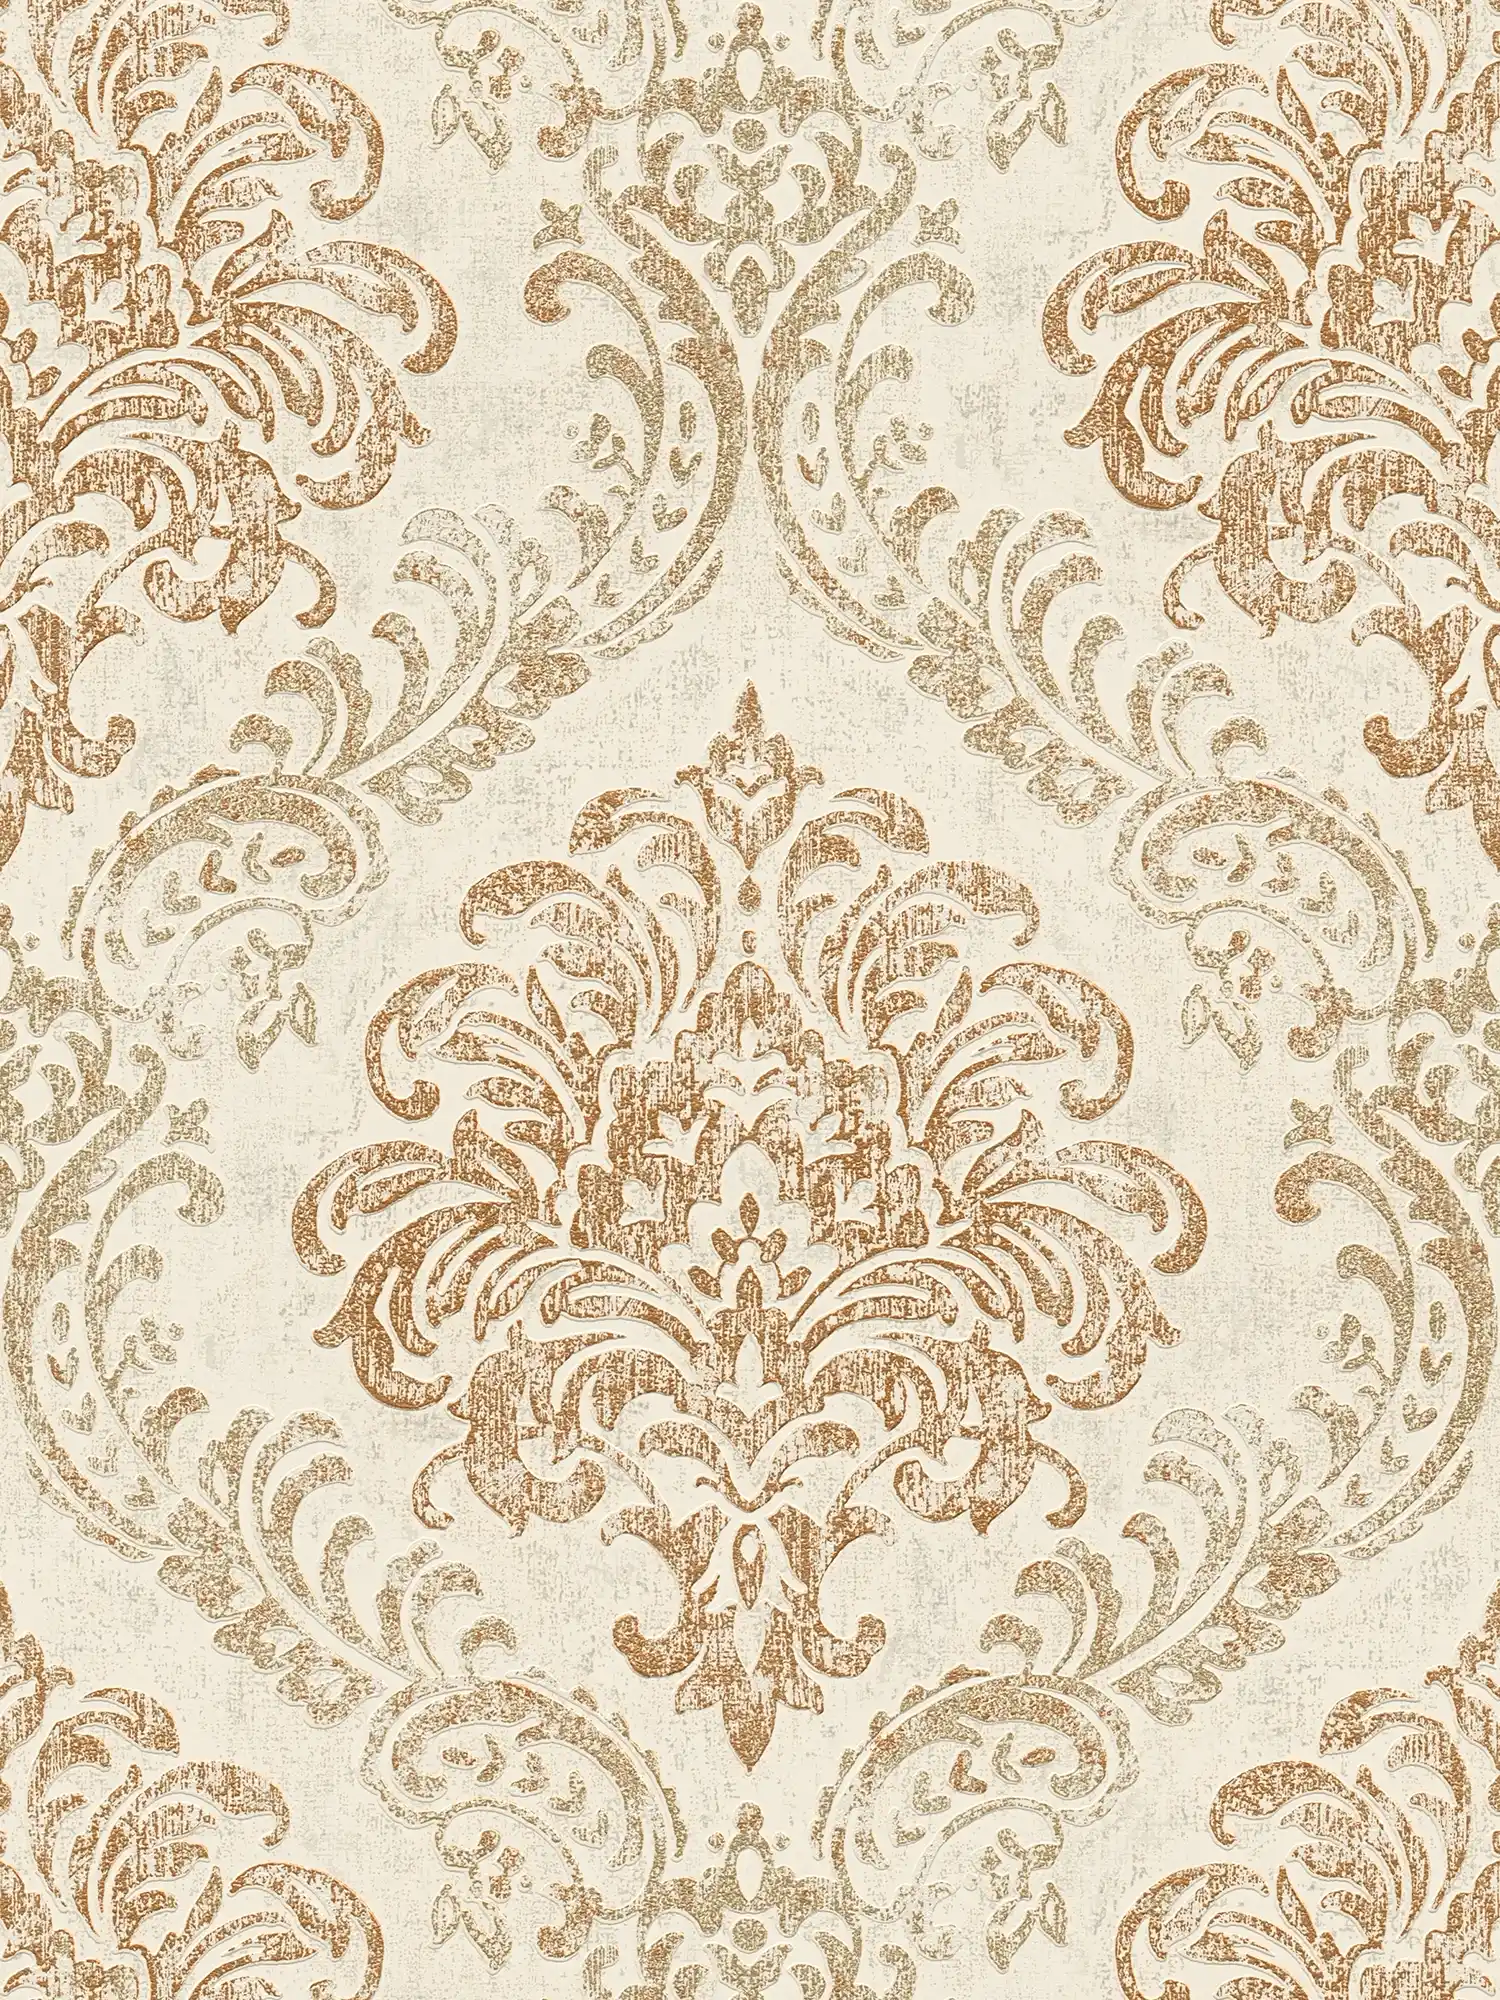 Baroque non-woven wallpaper with ornament and shiny metallic look - white, gold, silver
